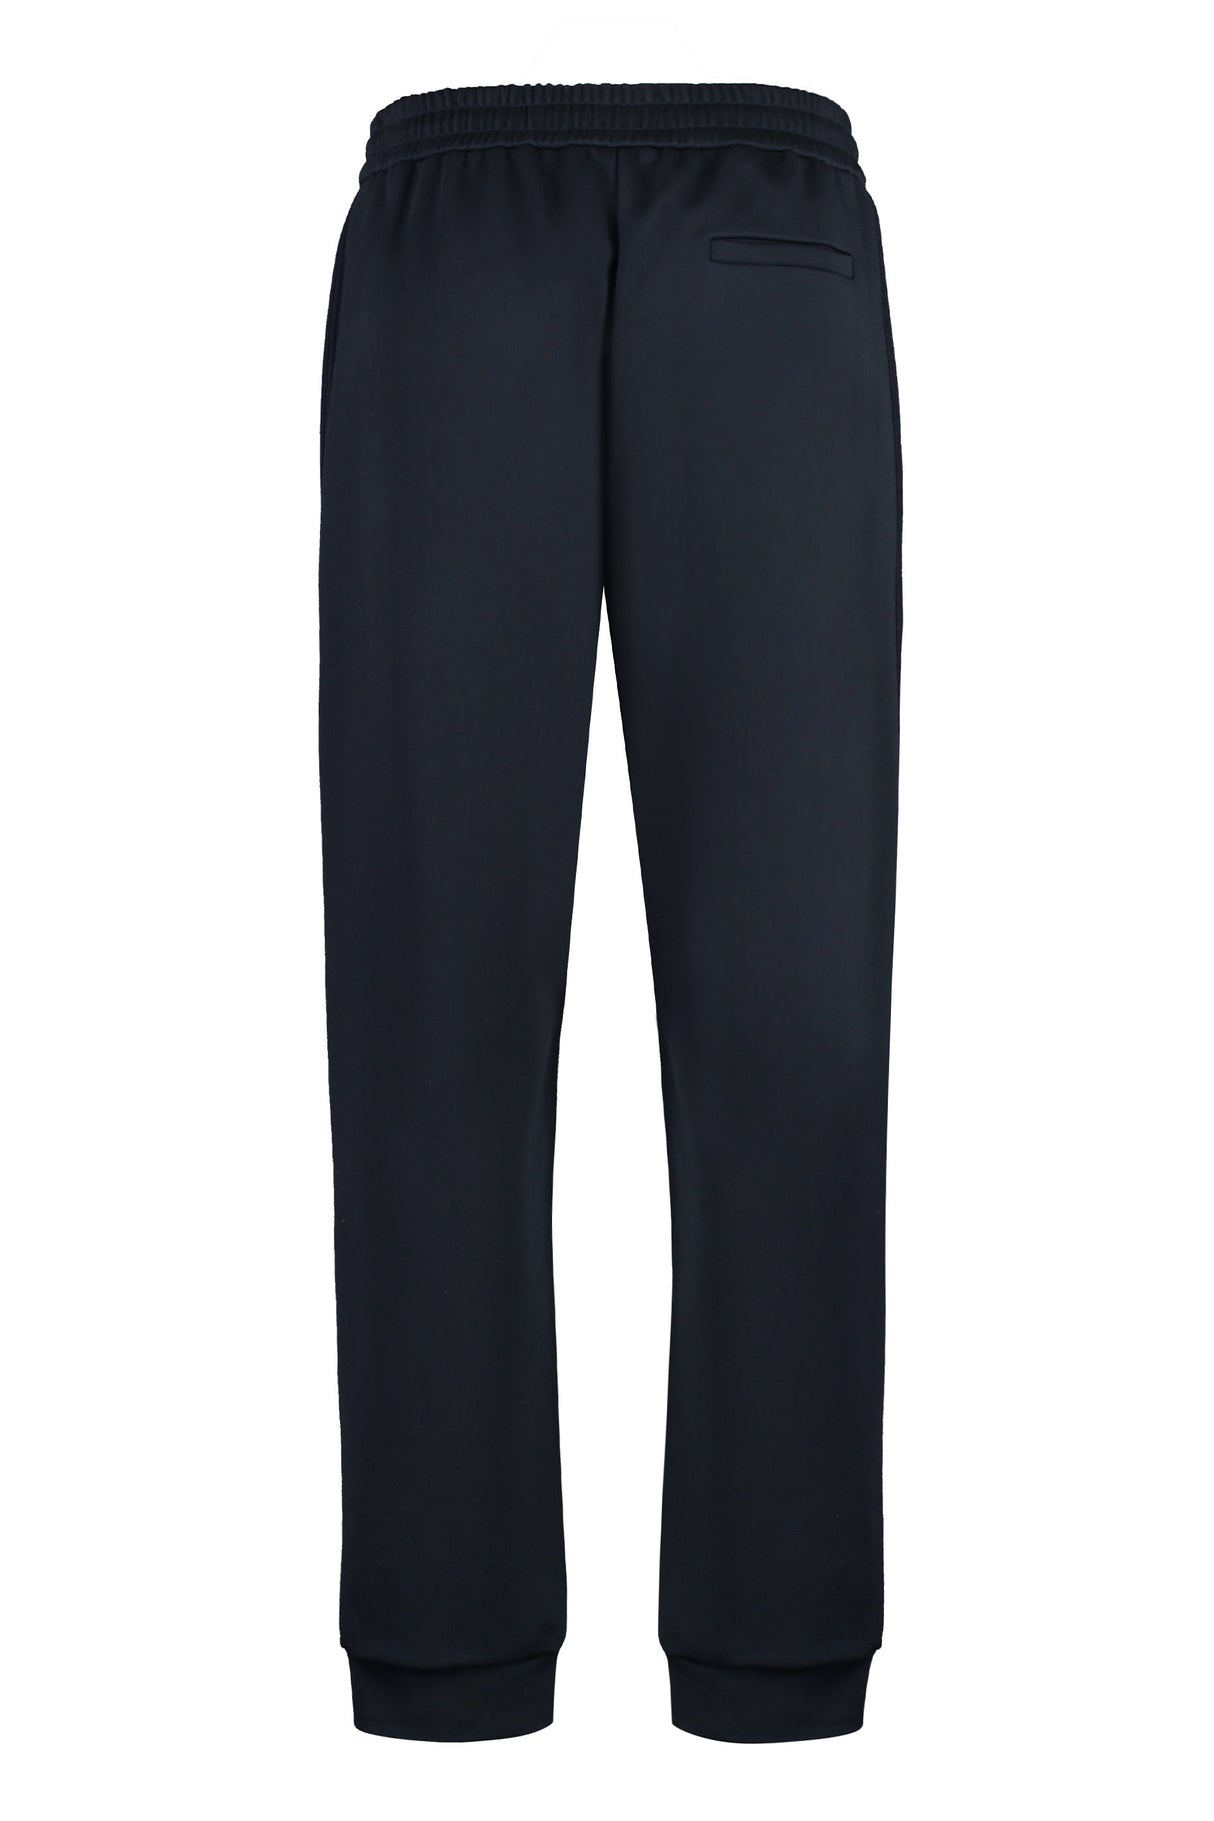 GIORGIO ARMANI Navy Technical Fabric Pants for Men - SS24 Collection